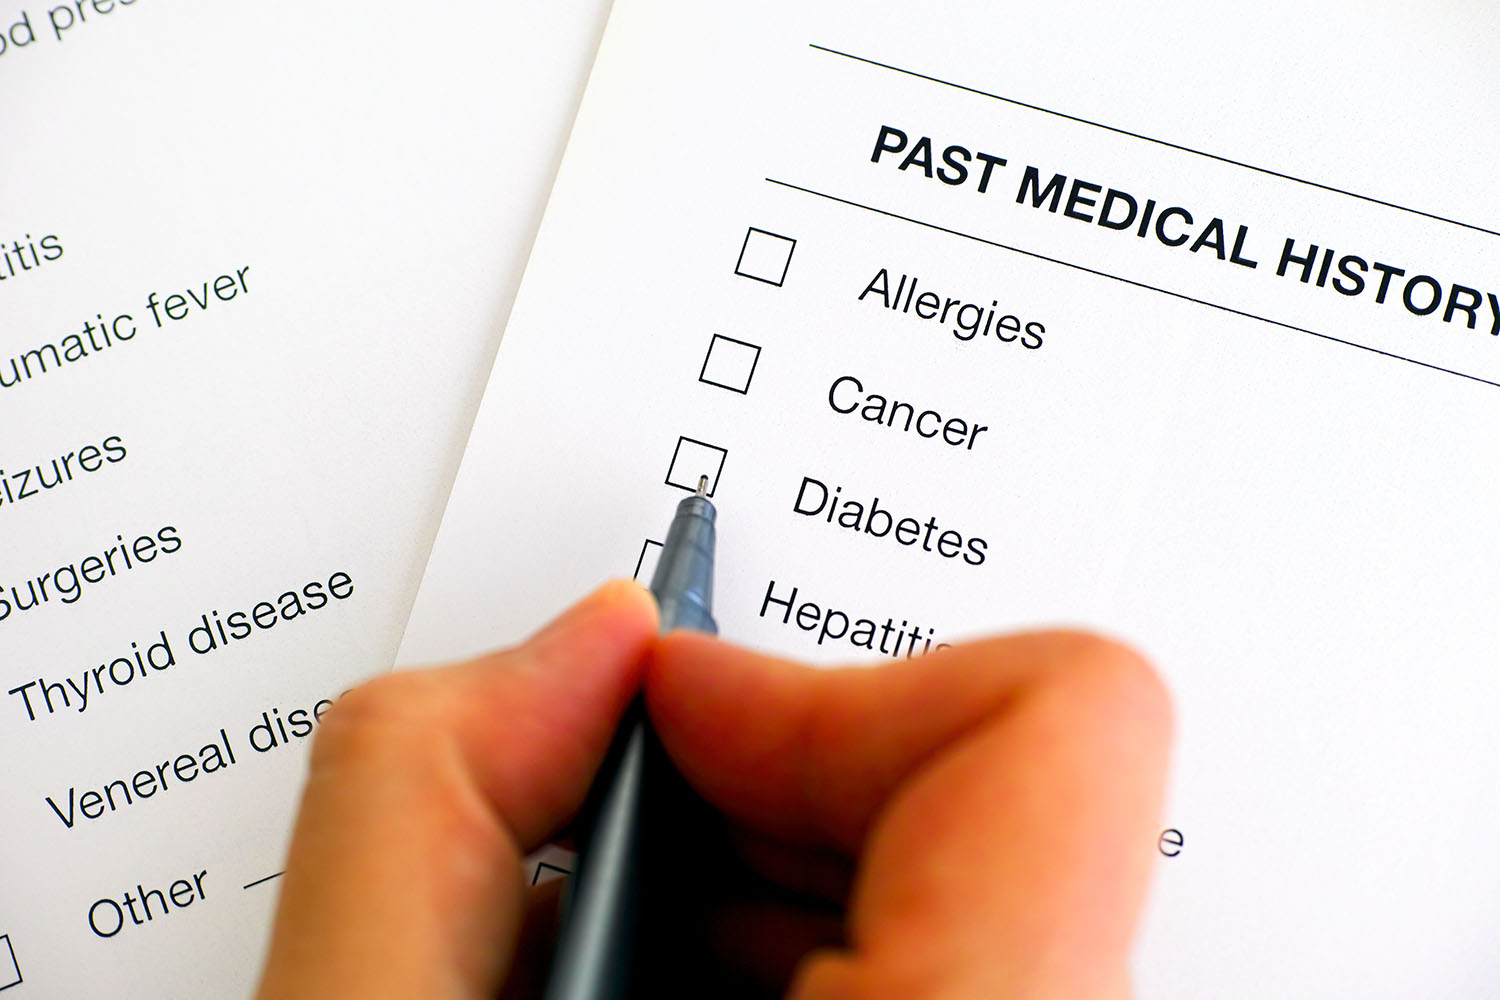 Learn More About Your Family's Medical History